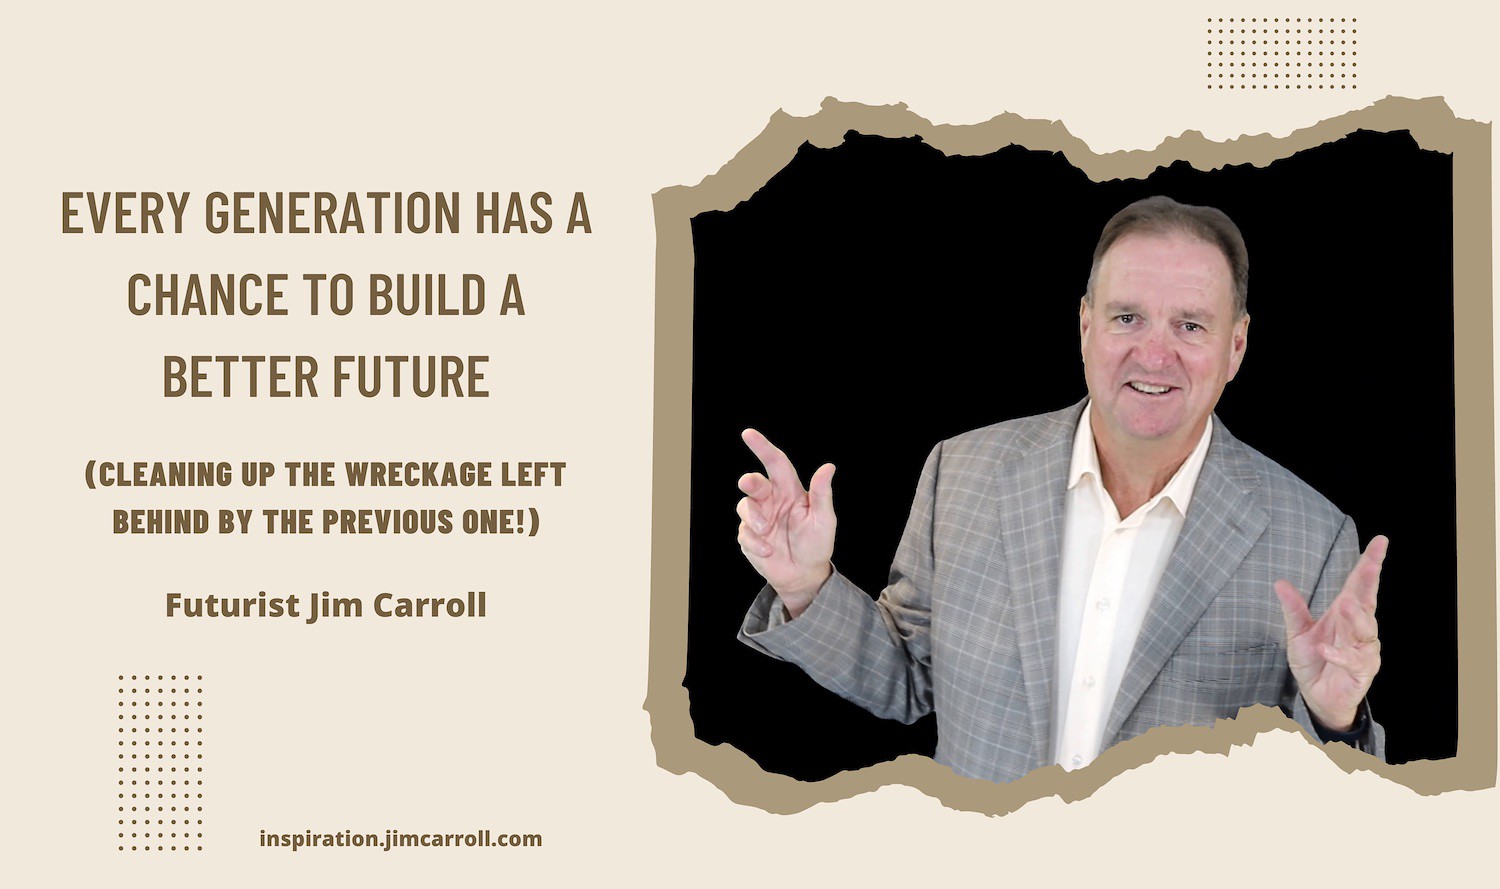 "Every generation has a chance to build a better future! - Futurist Jim Carroll